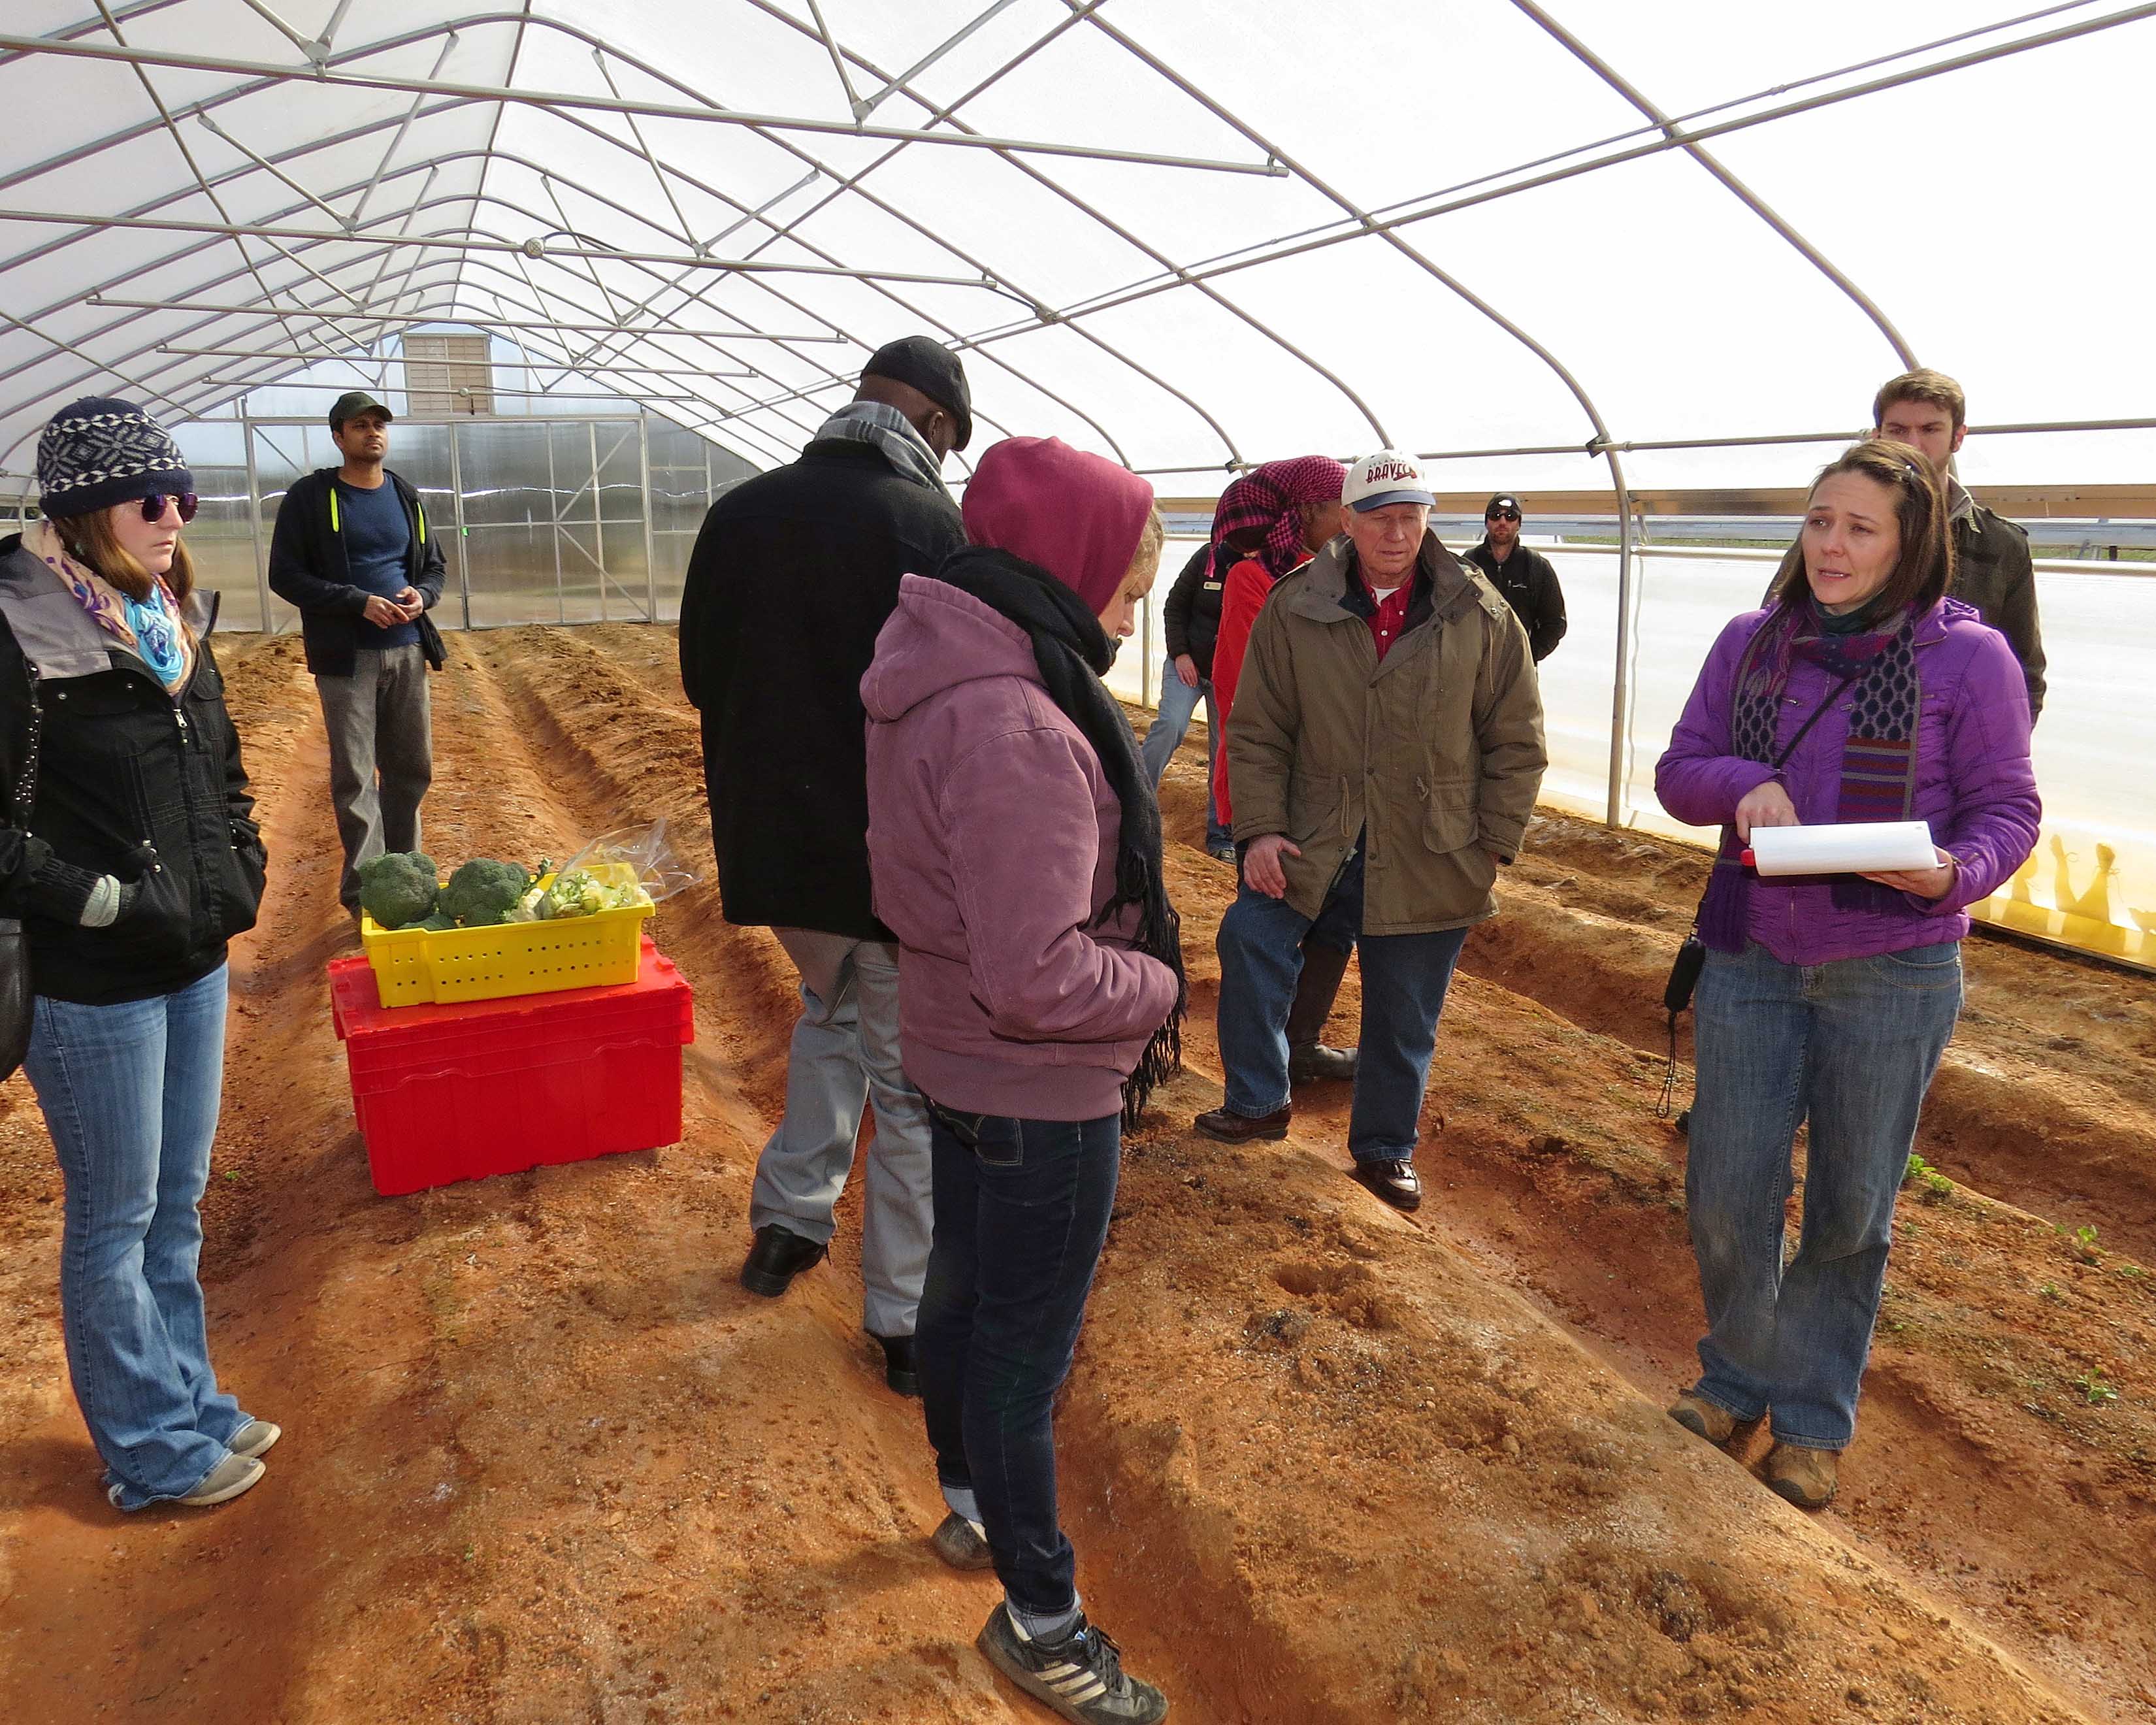 Assistant Professor of Horticulture Suzanne O'Connell leads a tour of her organic production high tunnels at the Durham Horticulture Farm as part of the 2015 Georgia Organics Conference, Feb. 20-21.